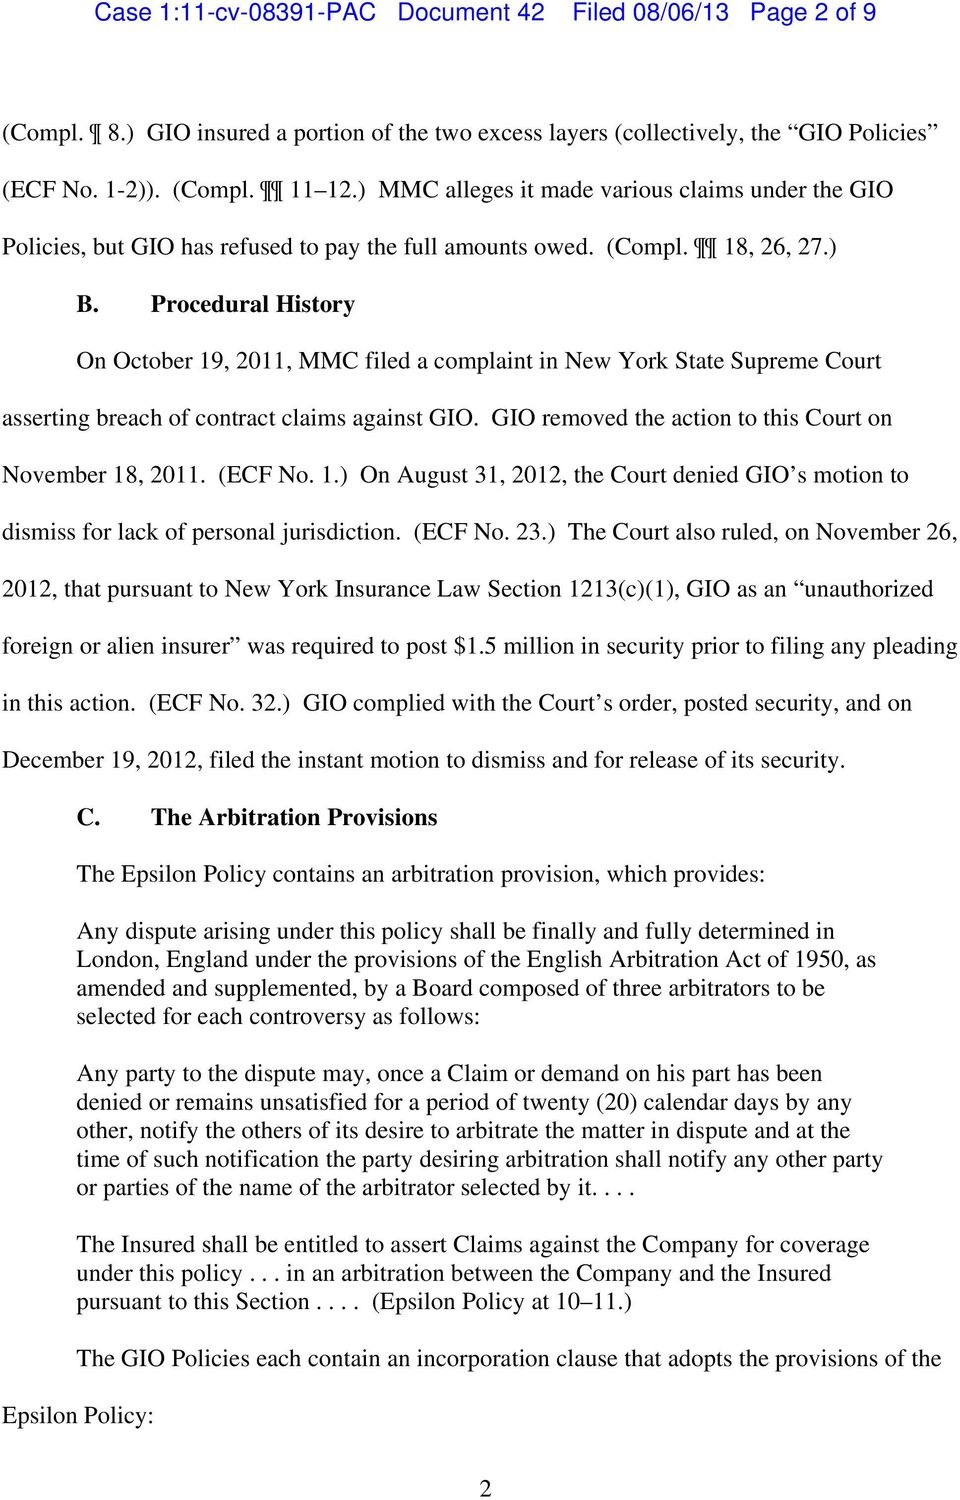 Procedural History On October 19, 2011, MMC filed a complaint in New York State Supreme Court asserting breach of contract claims against GIO.